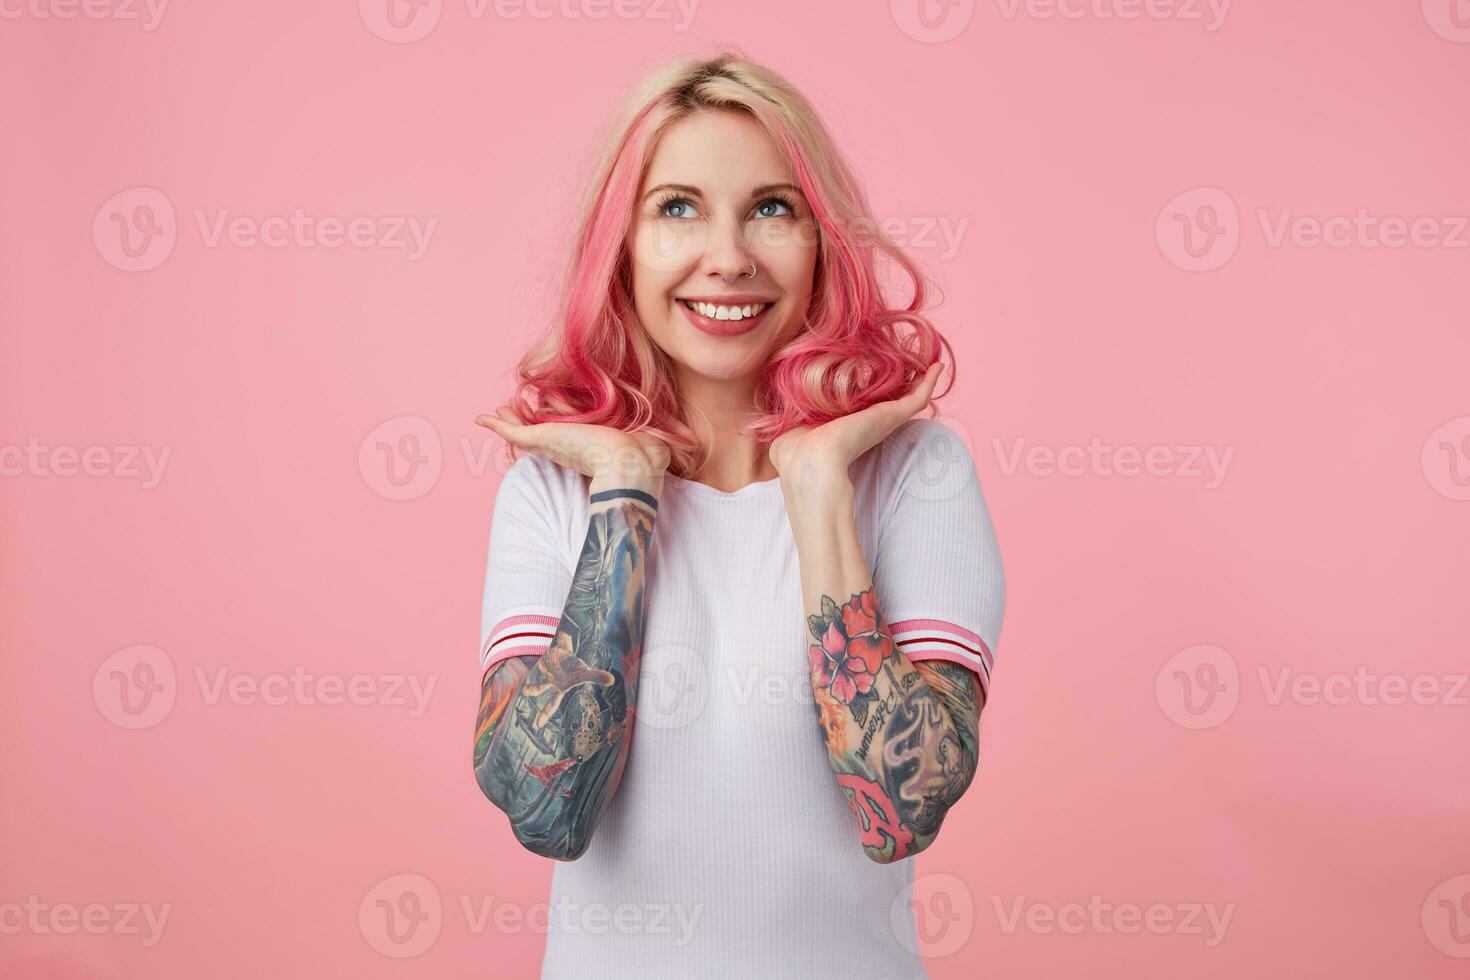 Portrait of young happy beautiful pink haired lady with tattooed hands, wears in white t-shirt, straightens her hair, happy with her new hair color and styling. Looks up, stands over pink background. photo